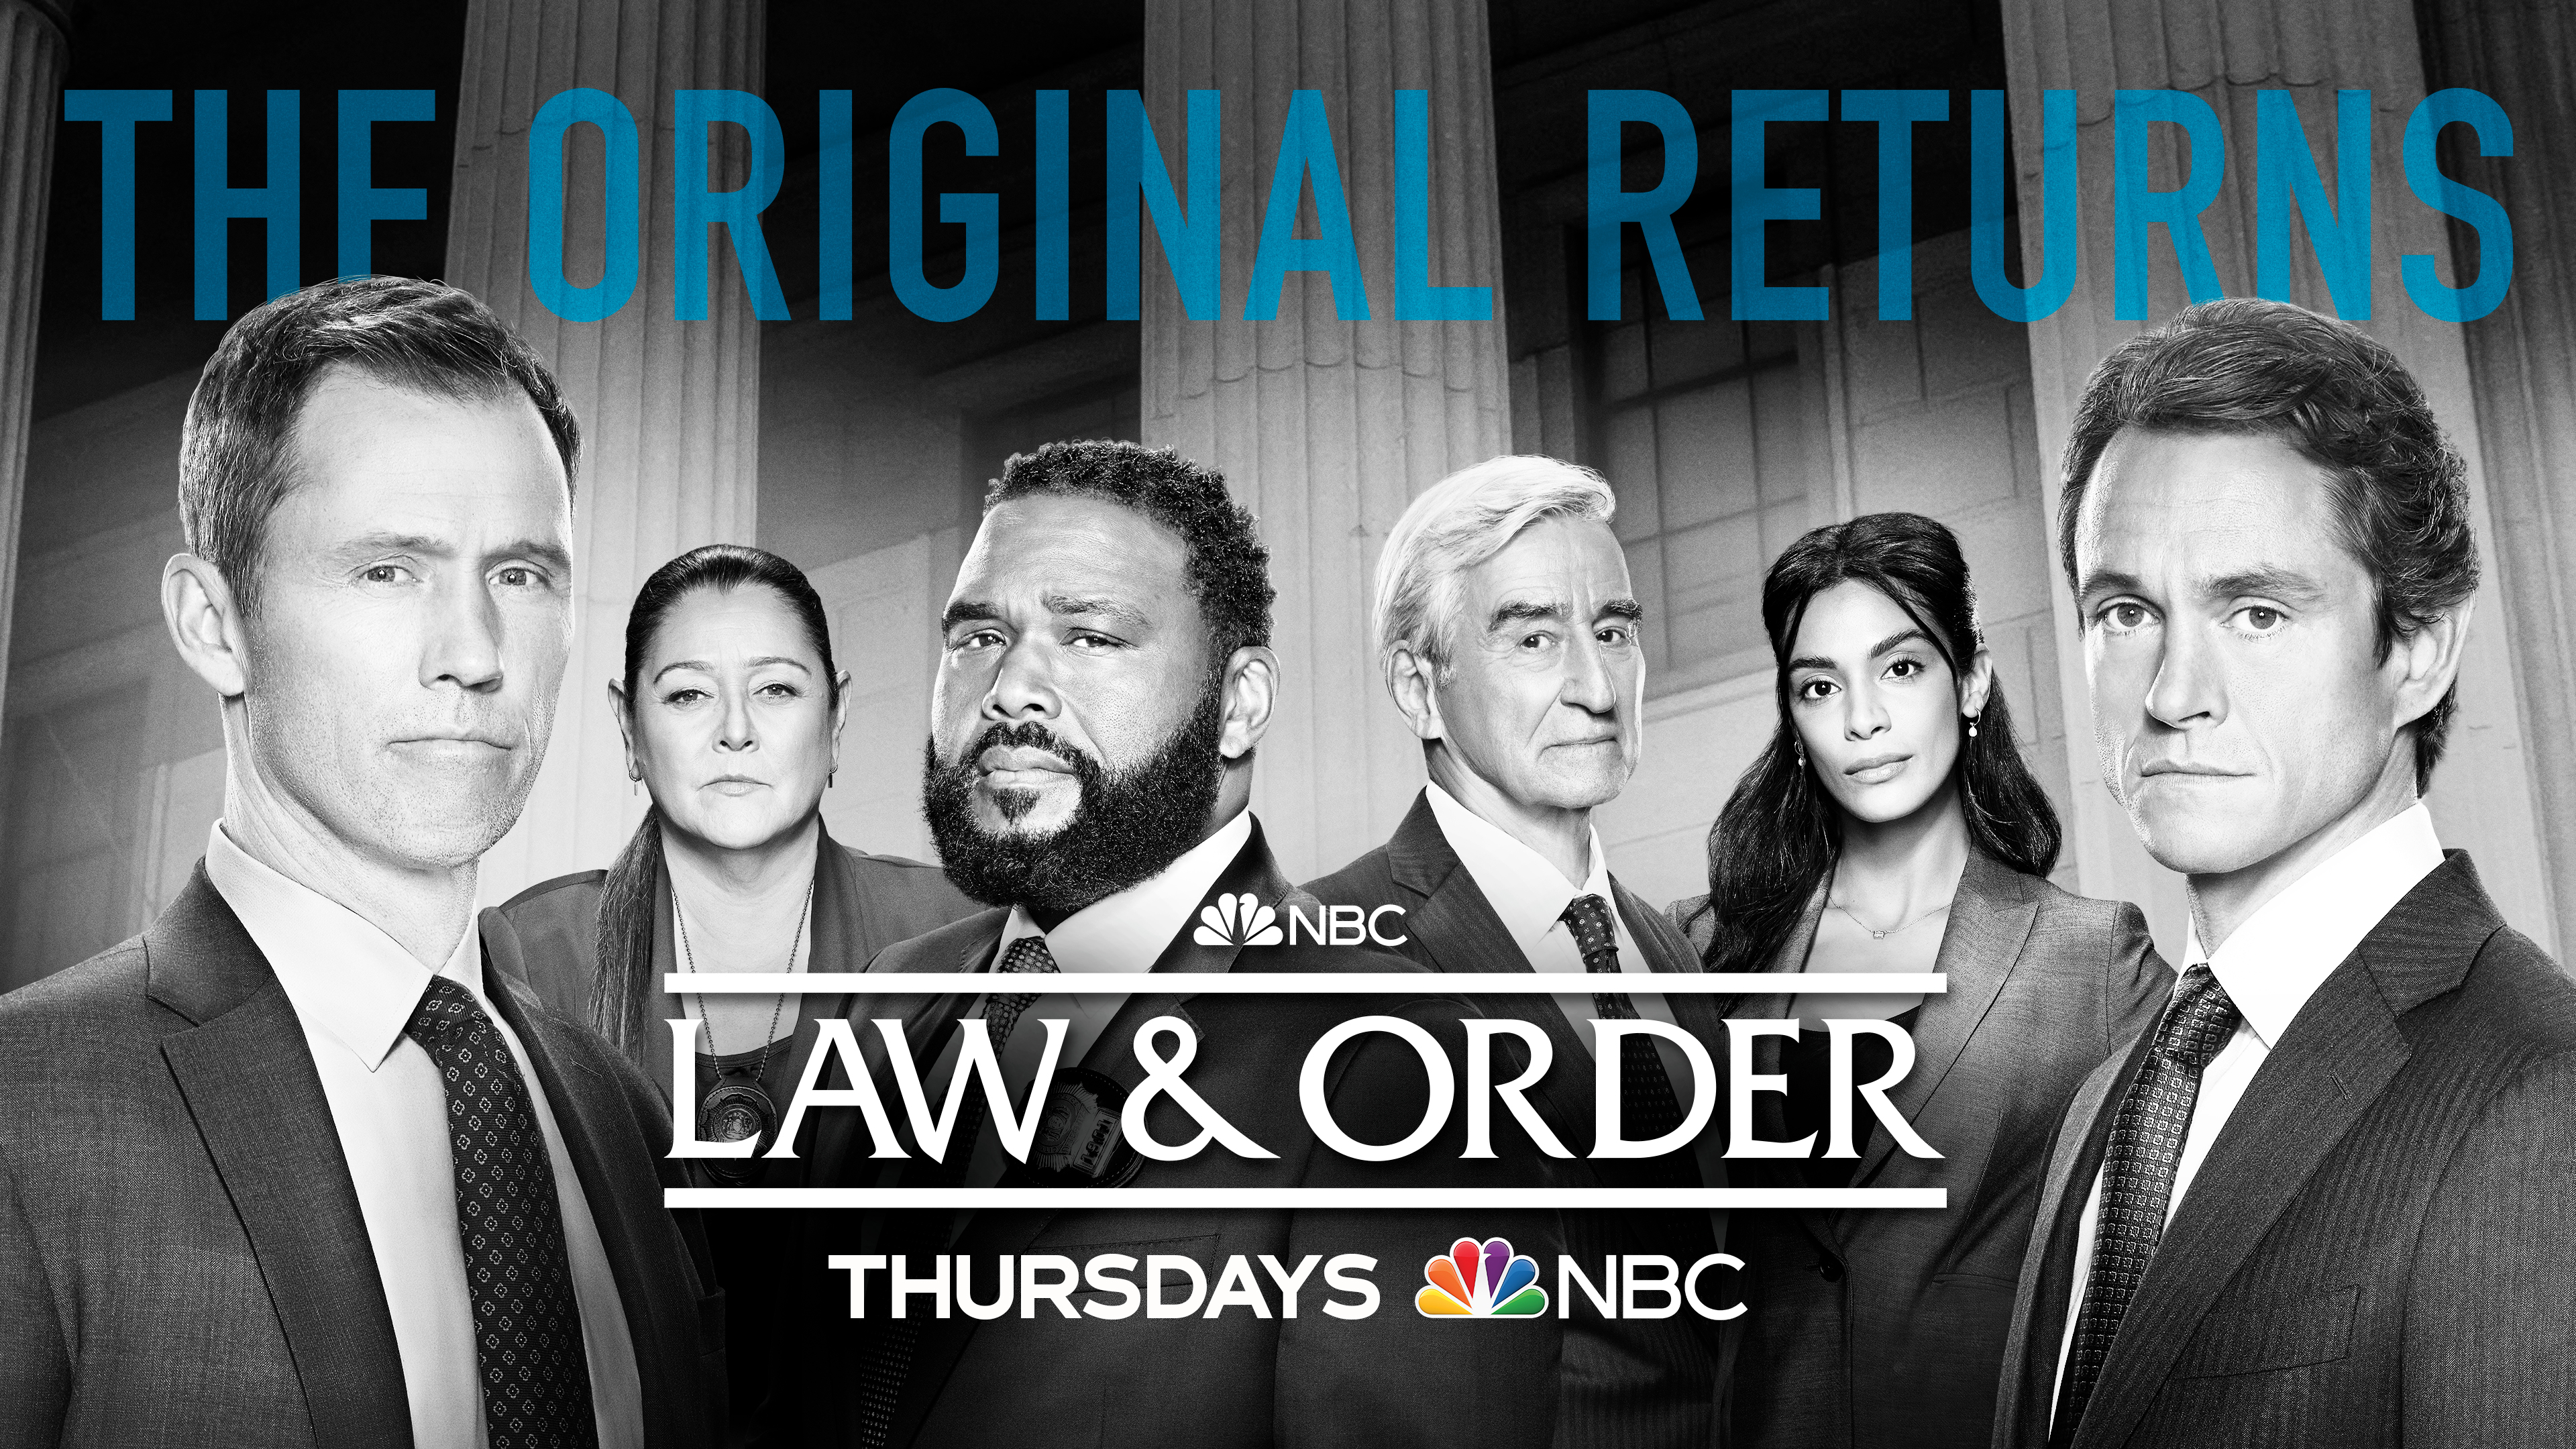 law & order cast